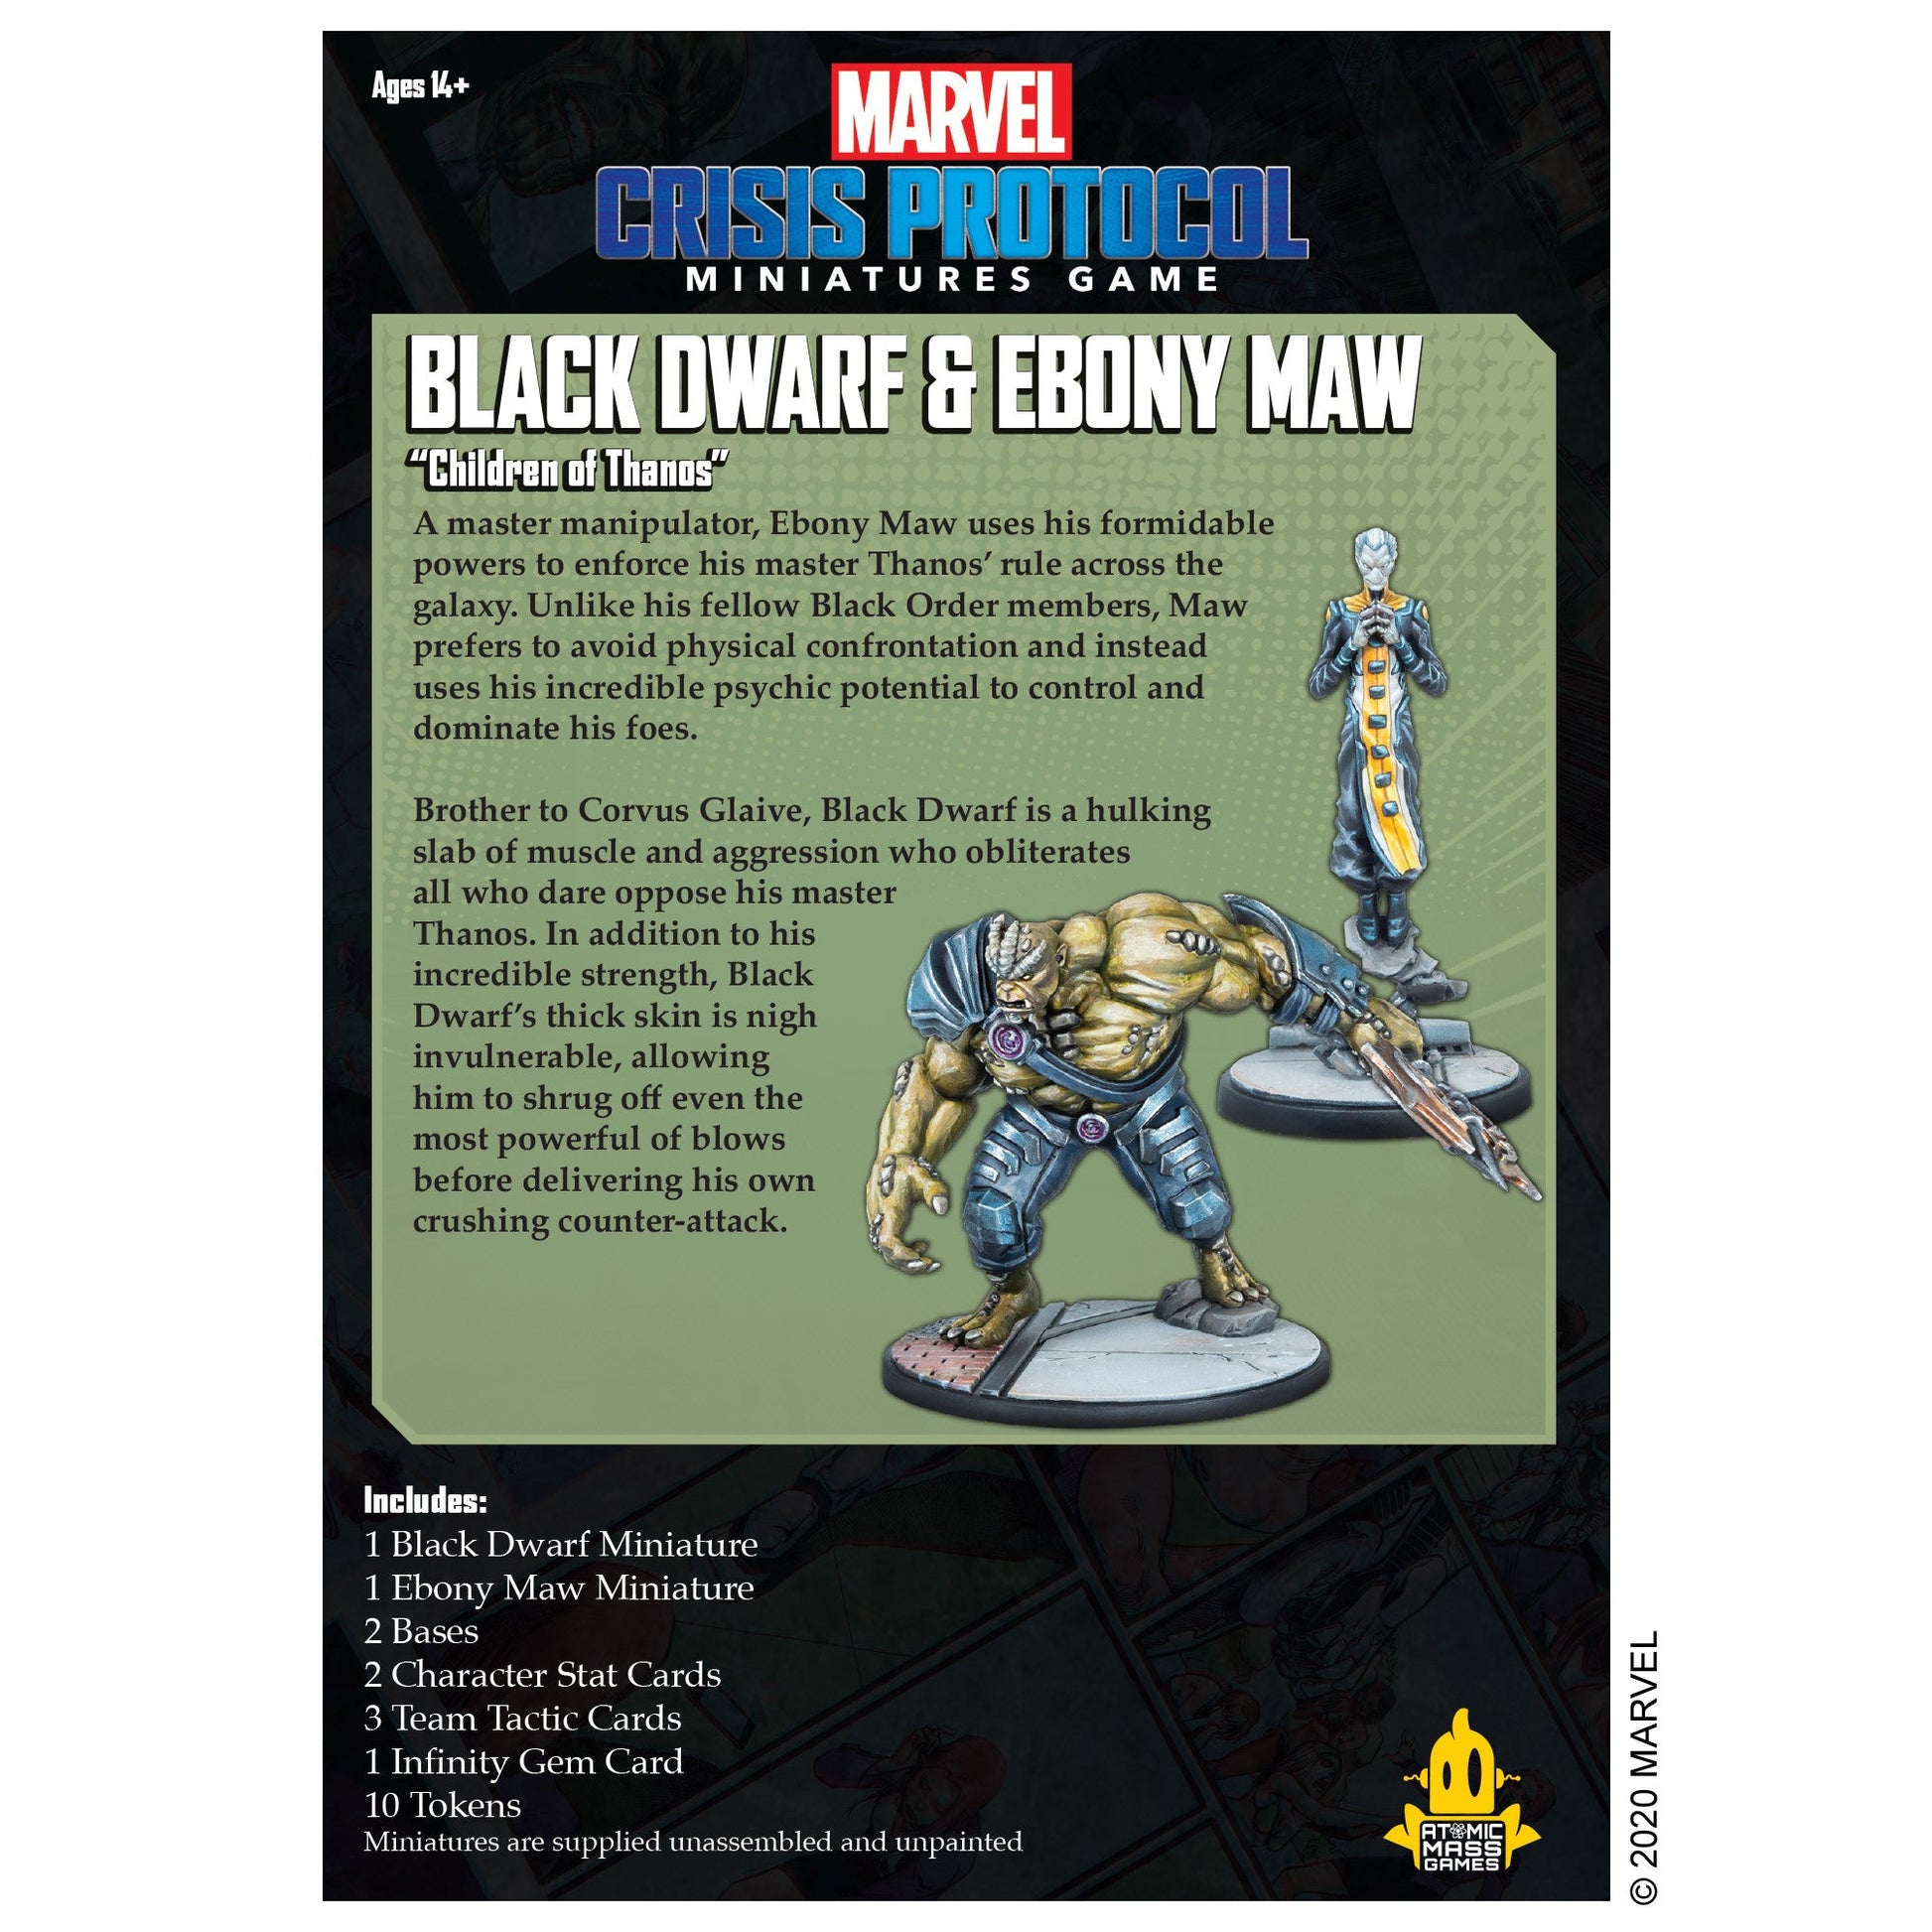 Marvel Crisis Protocol Black Dwarf & Ebony Maw from Atomic Mass Games at The Compleat Strategist